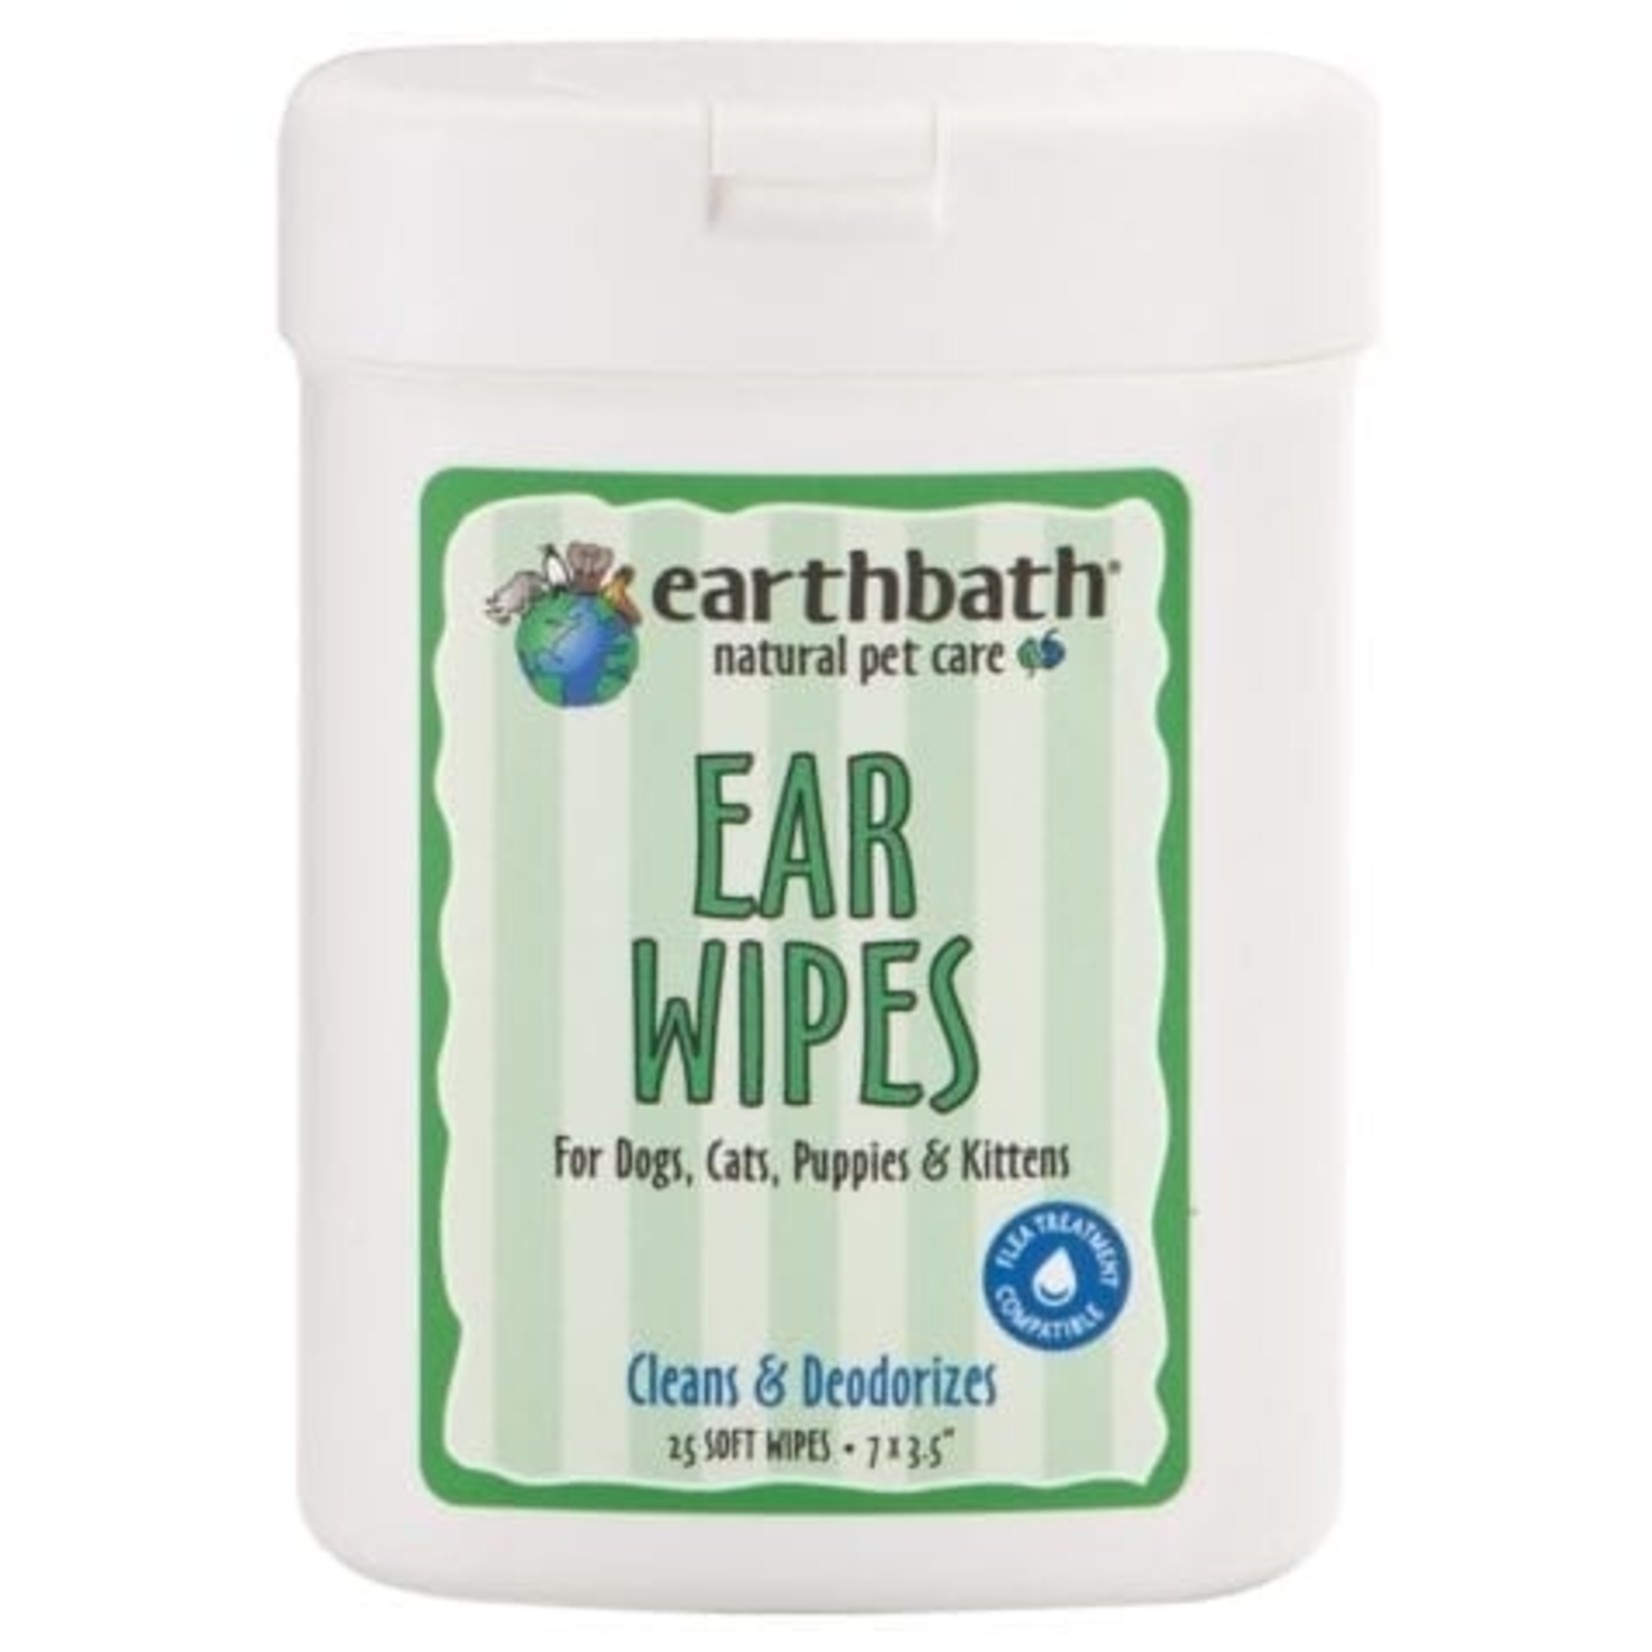 Earthbath Earthbath Ear Wipes for Dogs and Cats